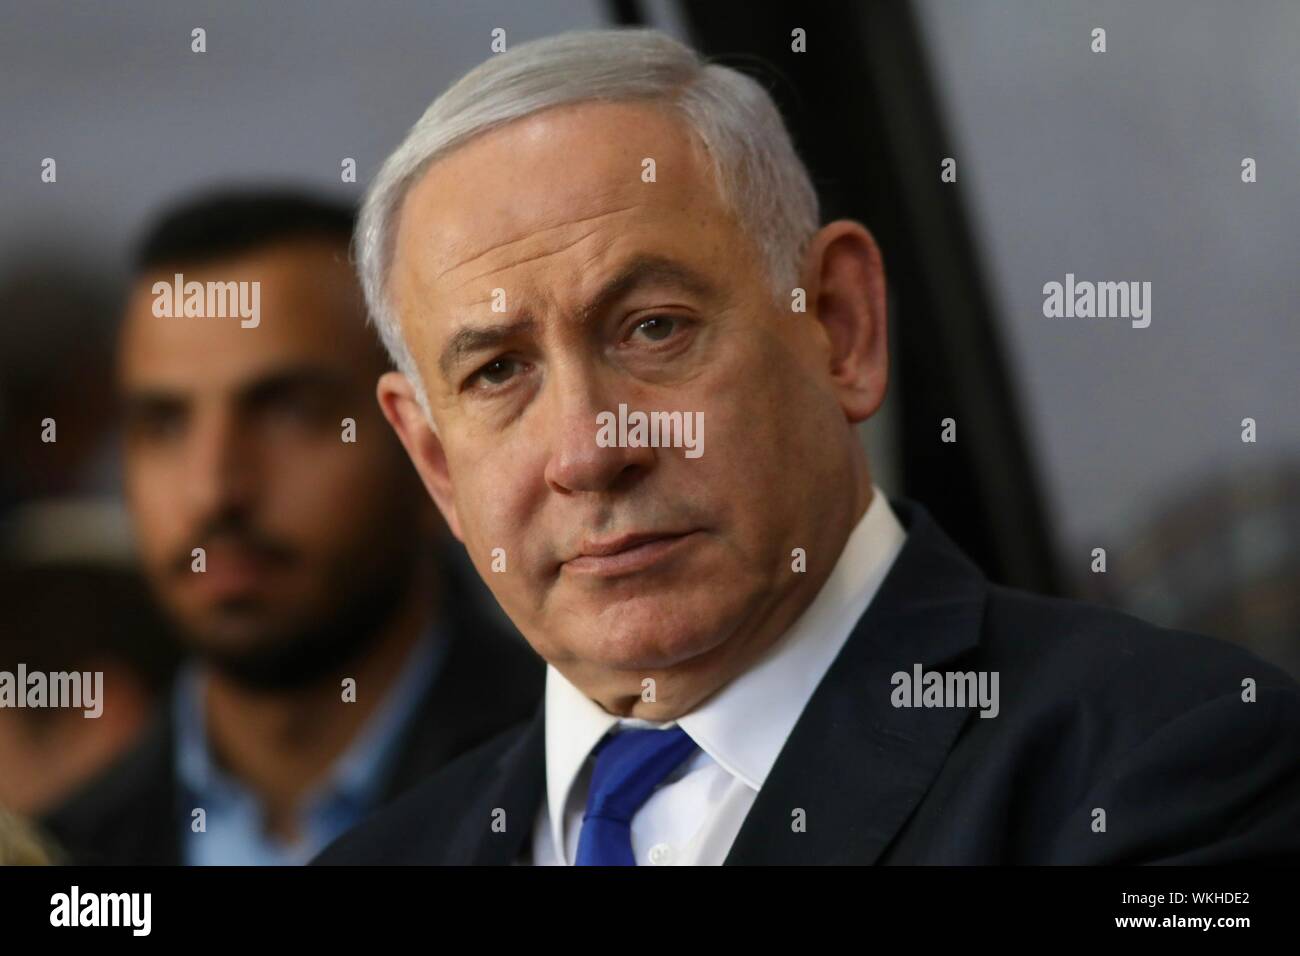 Hebron, Palestinian Territories. 04th Sep, 2019. Israeli Prime Minister Benjamin Netanyahu attends a state memorial ceremony commemorating 90 years since the 1929 Hebron massacre, during which 67 Jews were killed in Palestinian riots, at the Tomb of the Patriarchs. Credit: Ilia Yefimovich/dpa/Alamy Live News Stock Photo